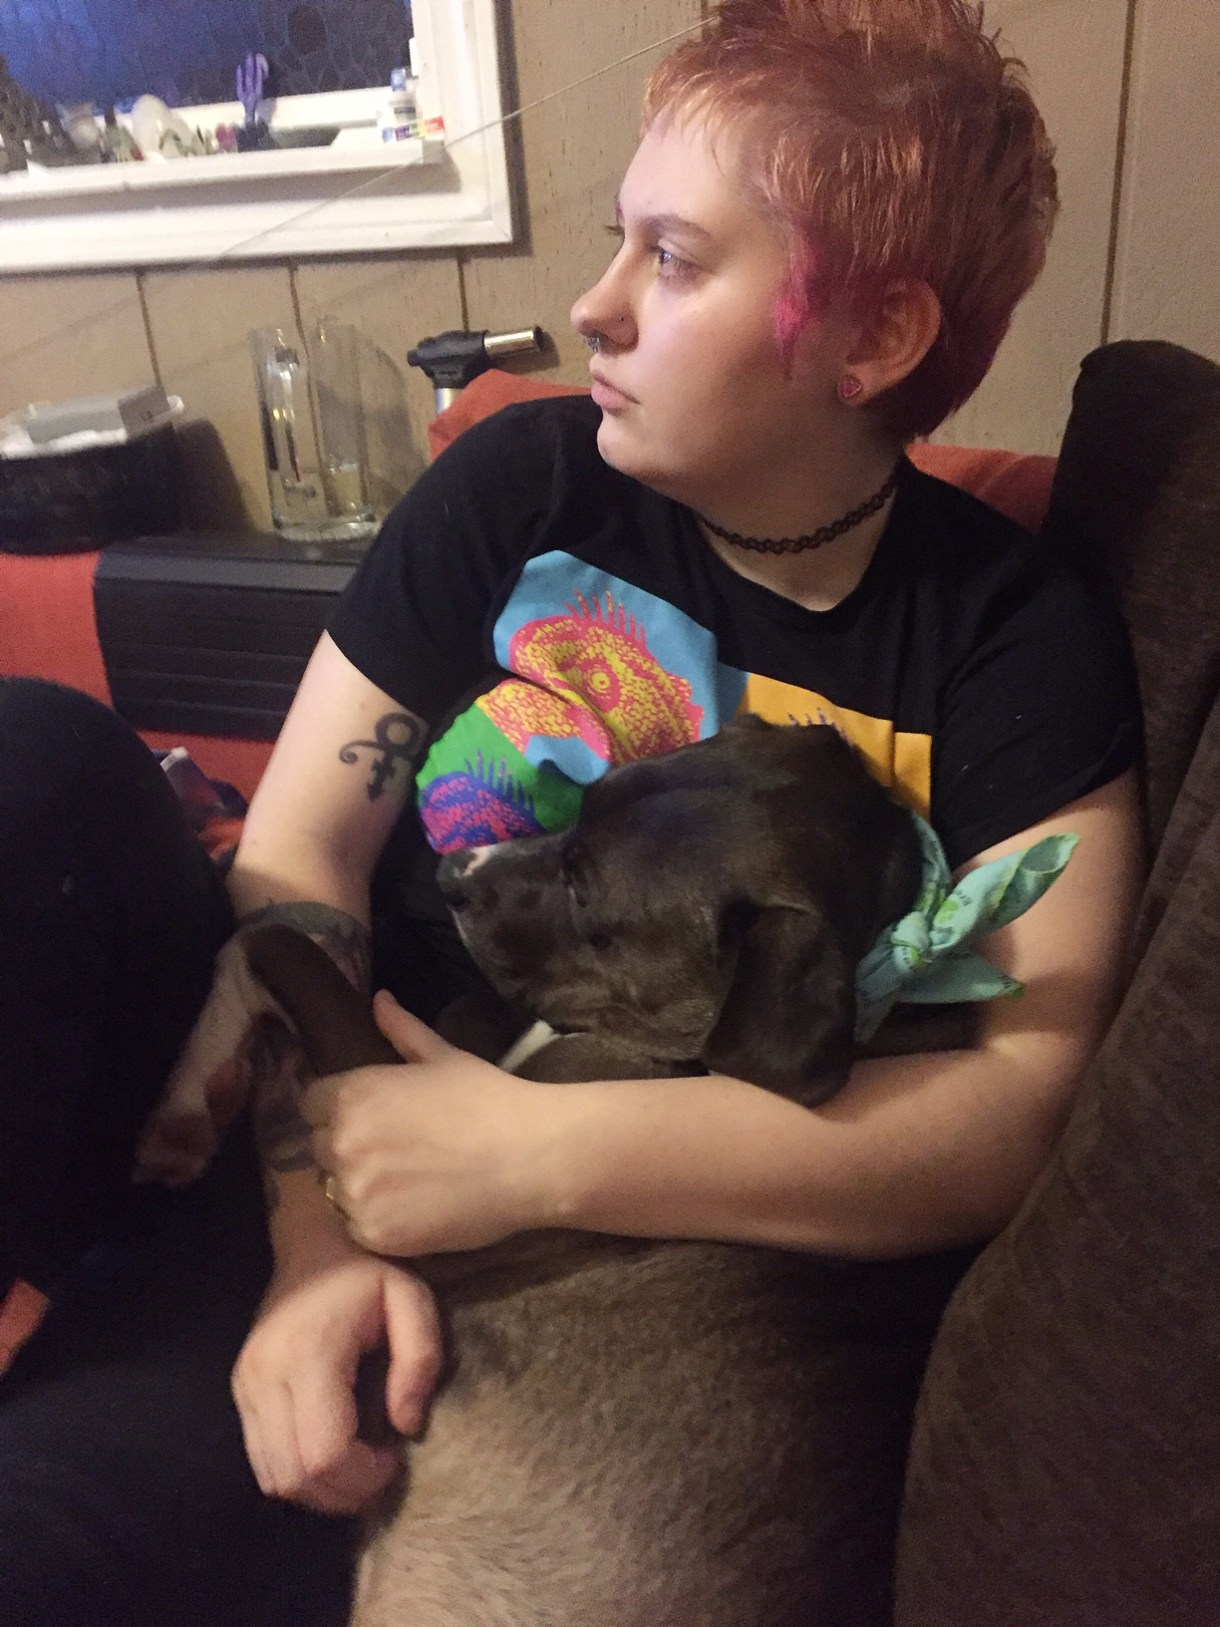 A light-skinned person with short pink hair cuddles a black dog on the couch